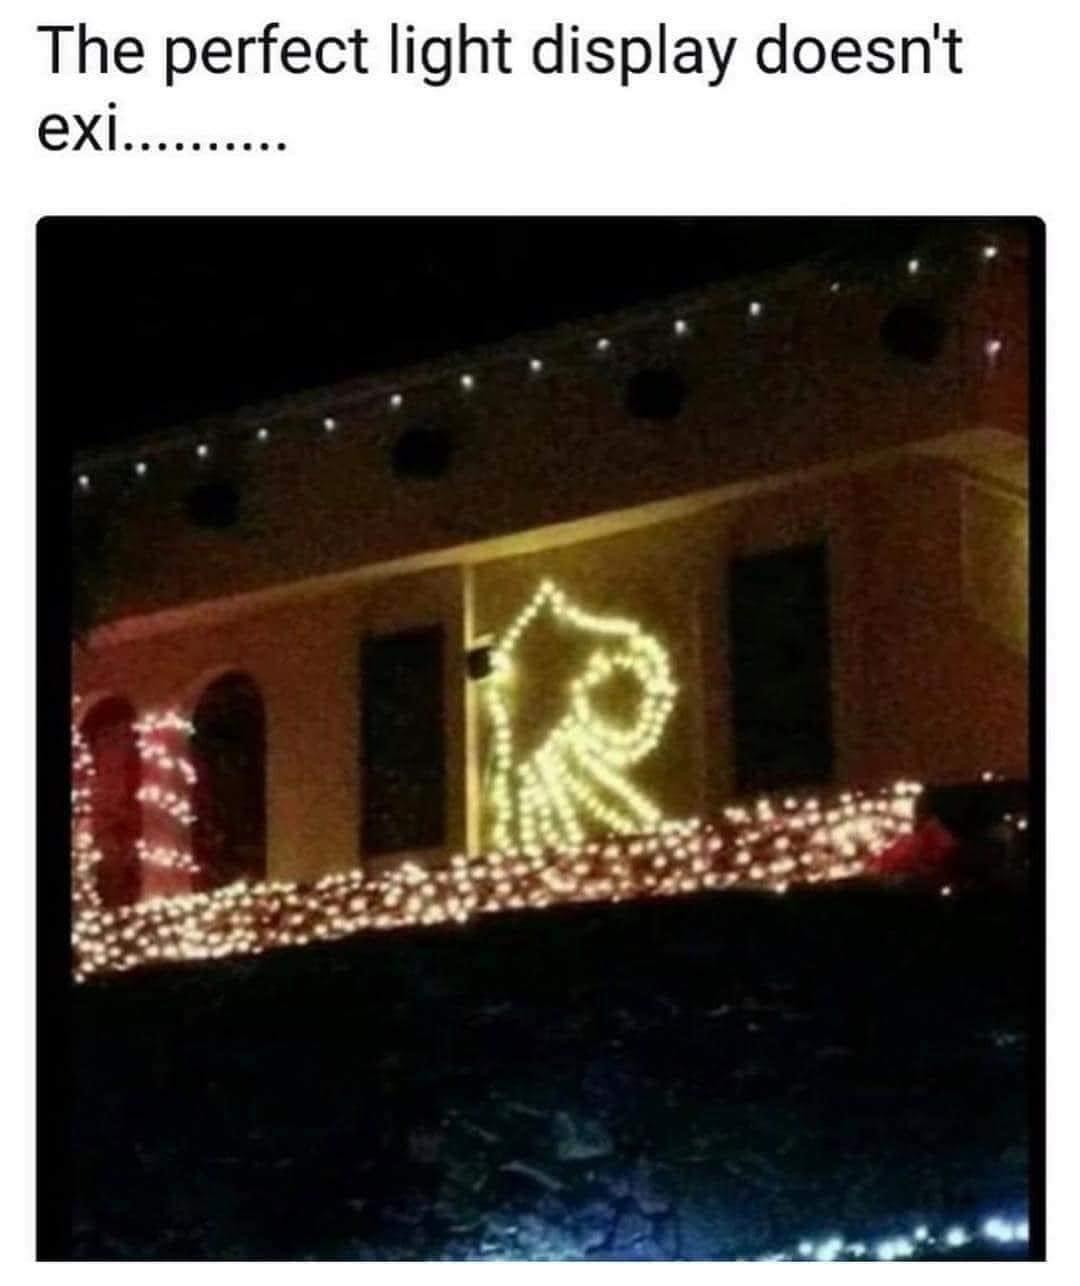 funny memes - funny christmas lights meme - The perfect light display doesn't exi..........